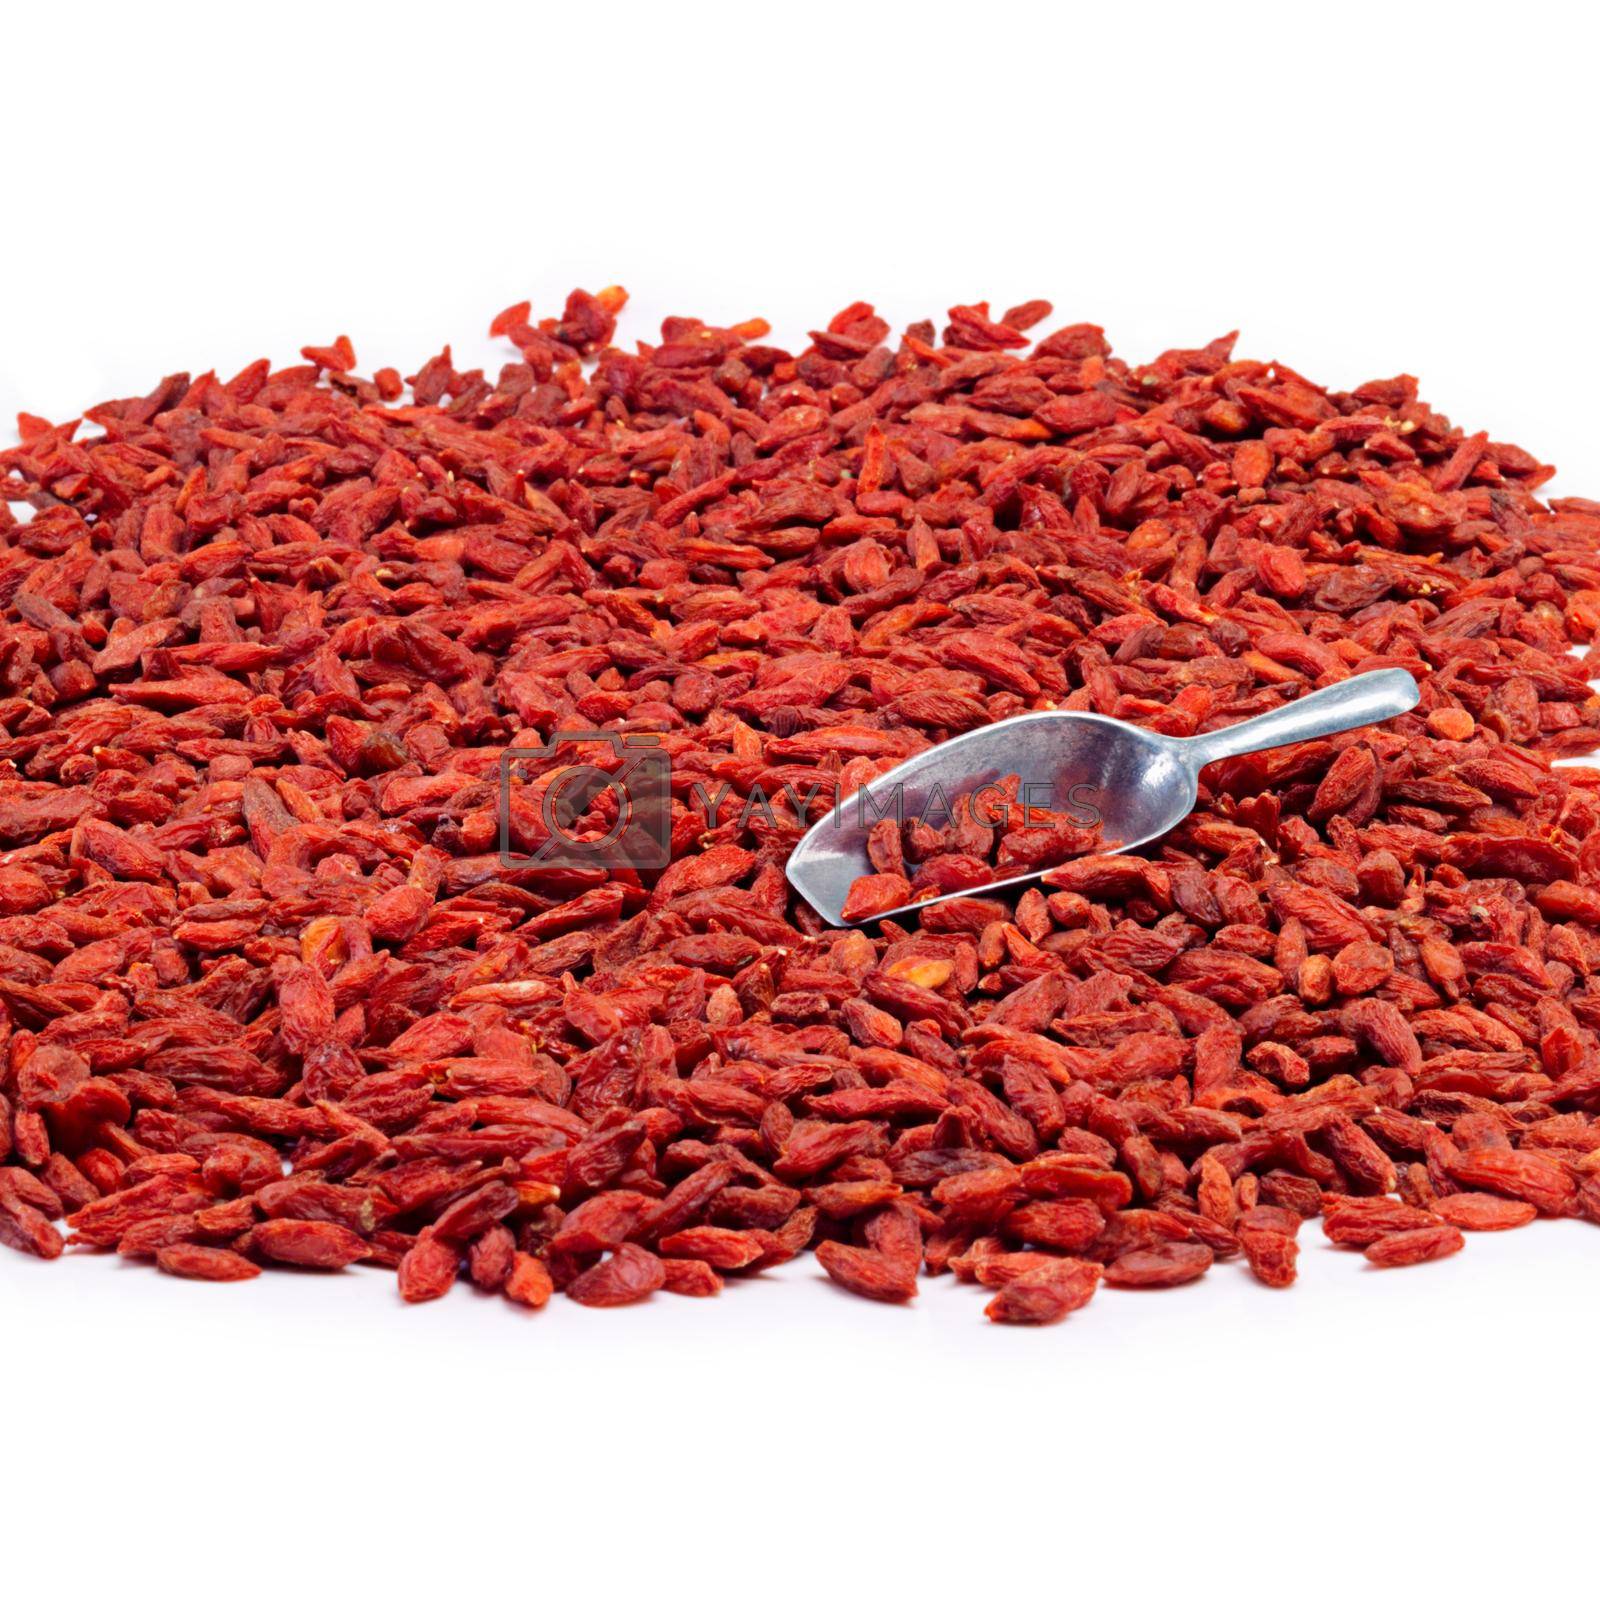 Royalty free image of Get some goji power. Studio shot of a pile of goji berries with a metal scoop. by YuriArcurs